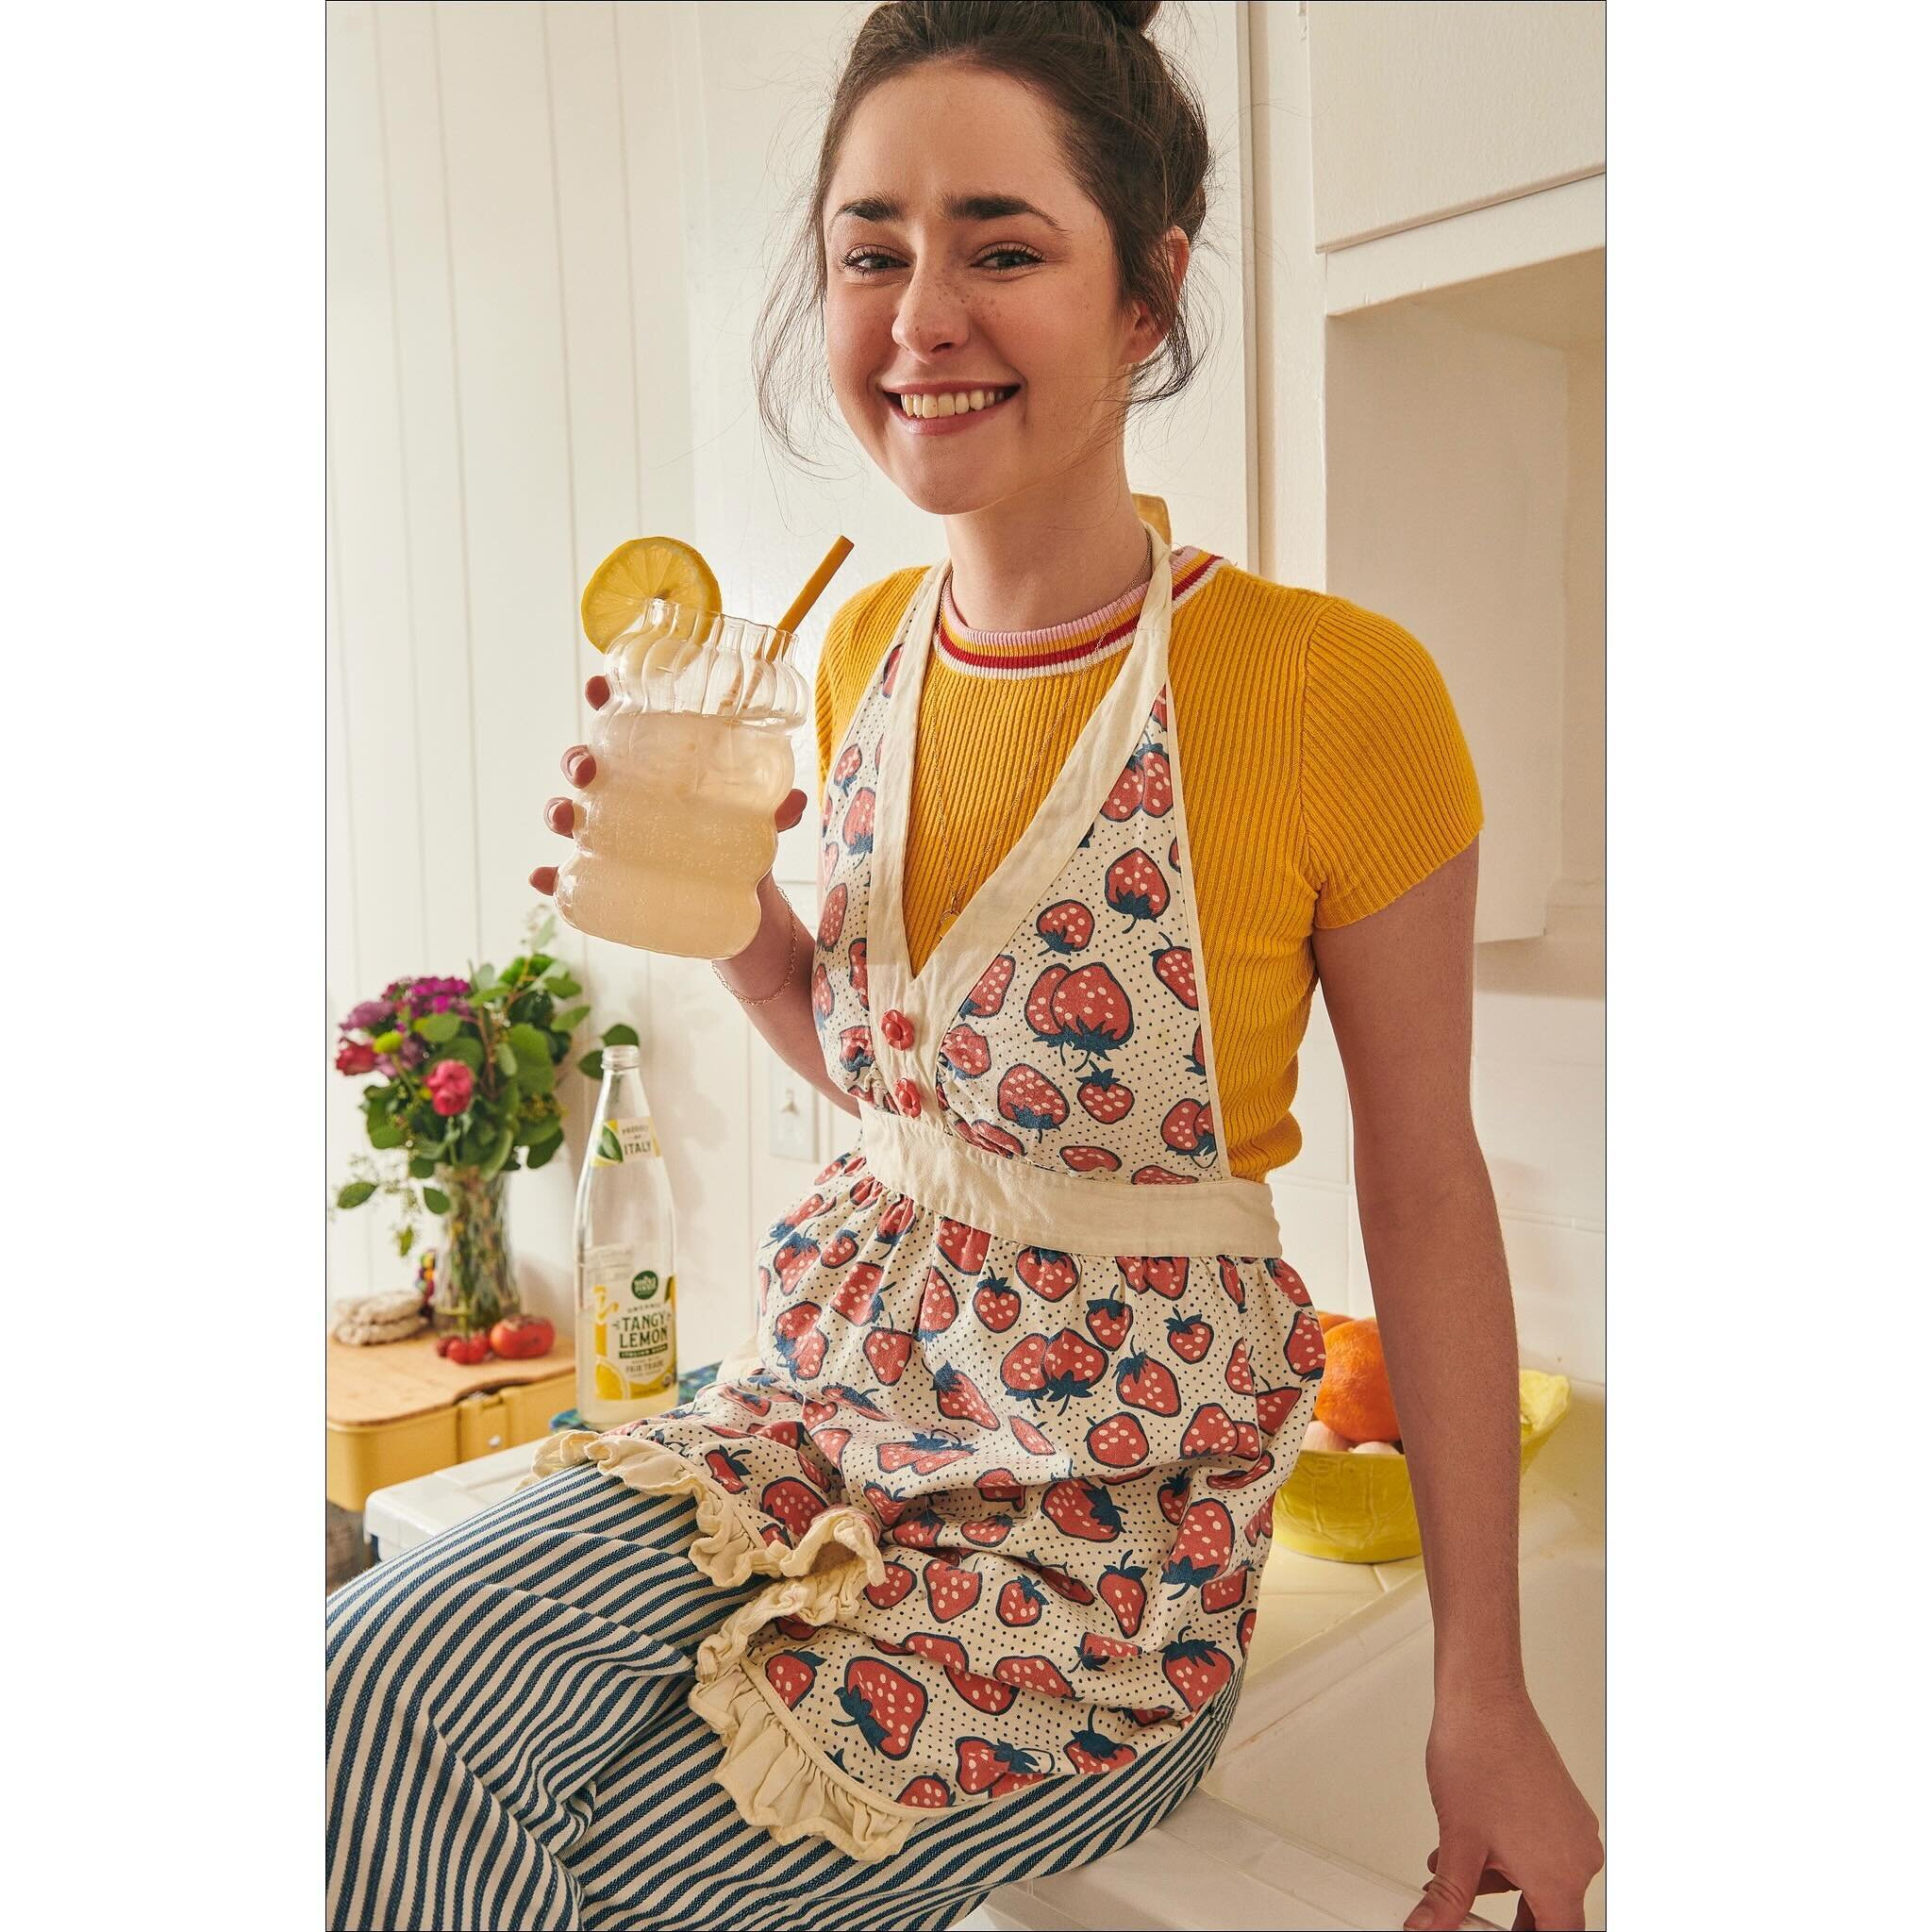 Refreshing style with @ashleywicka and, of course, little miss Willie Bean.  #anthro #anthrohome #lemonade #cooking #fashionphotography #lifestylephotography